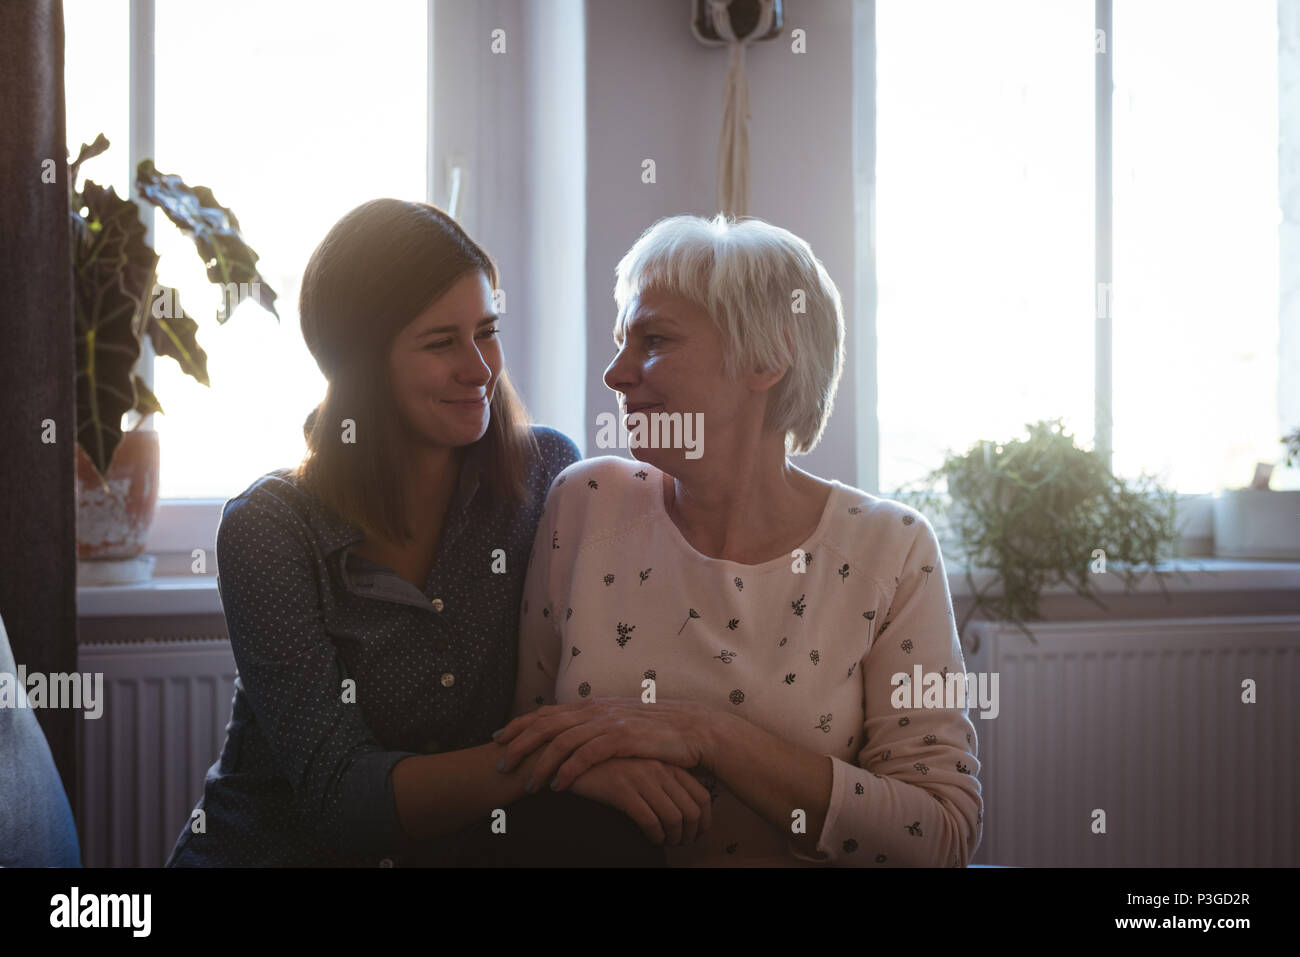 Senior woman and daughter sitting on sofa embracing each other in the living room Stock Photo